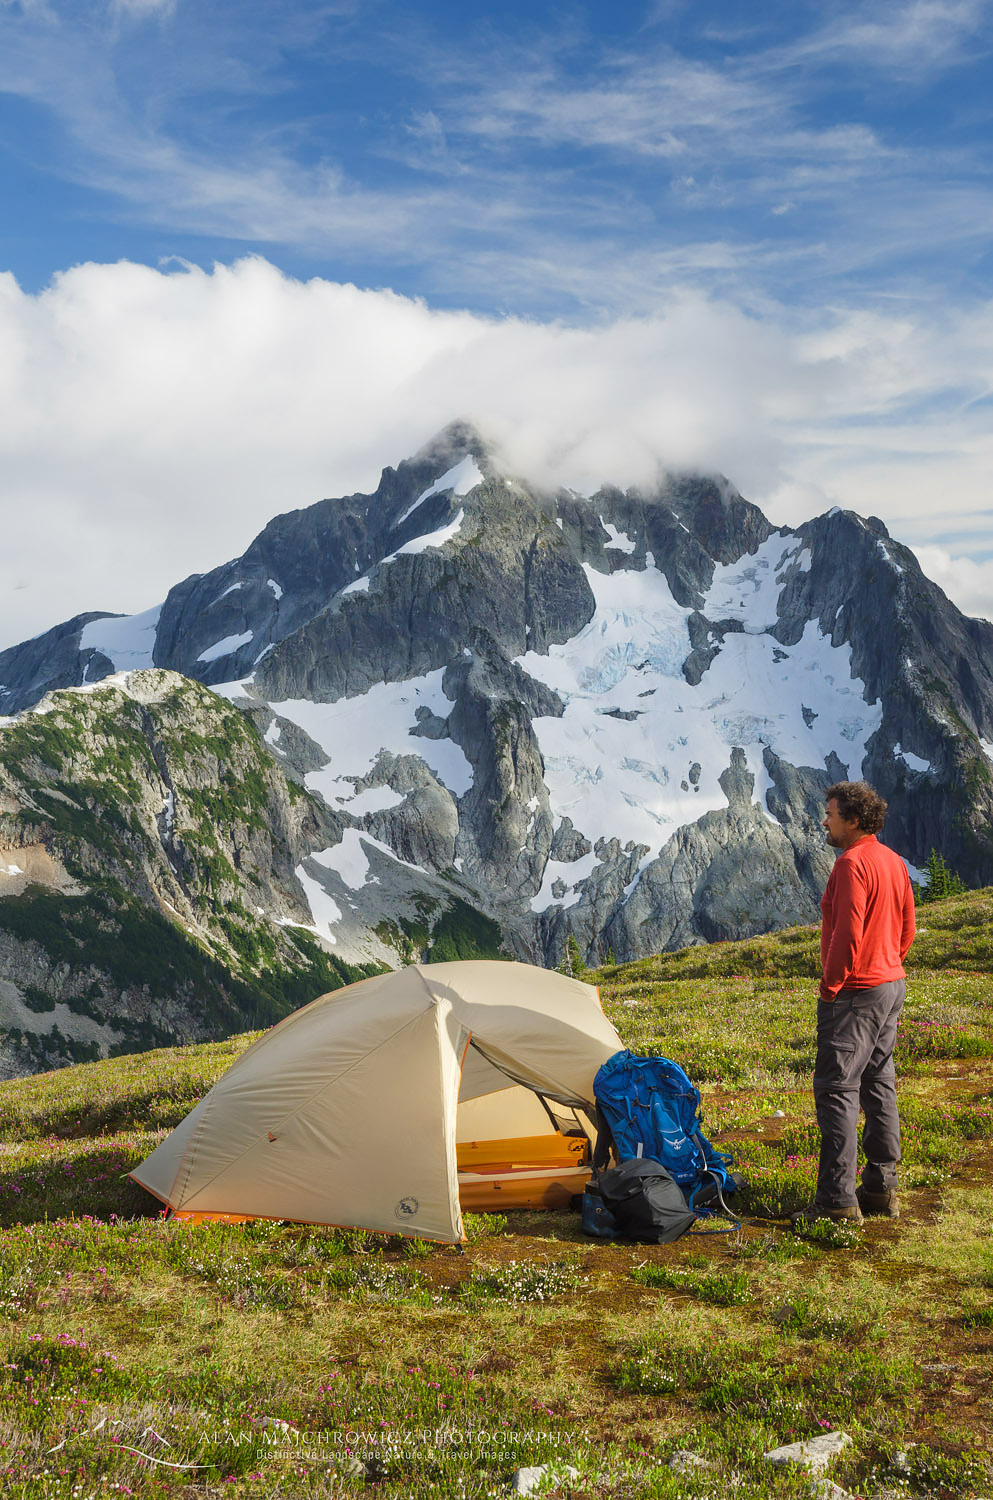 Adult male hiker in red shirt at backcountry camp on Red Face Mountain, Whatcom Peak seen in the distance. North Cascades National Park Washington #61584